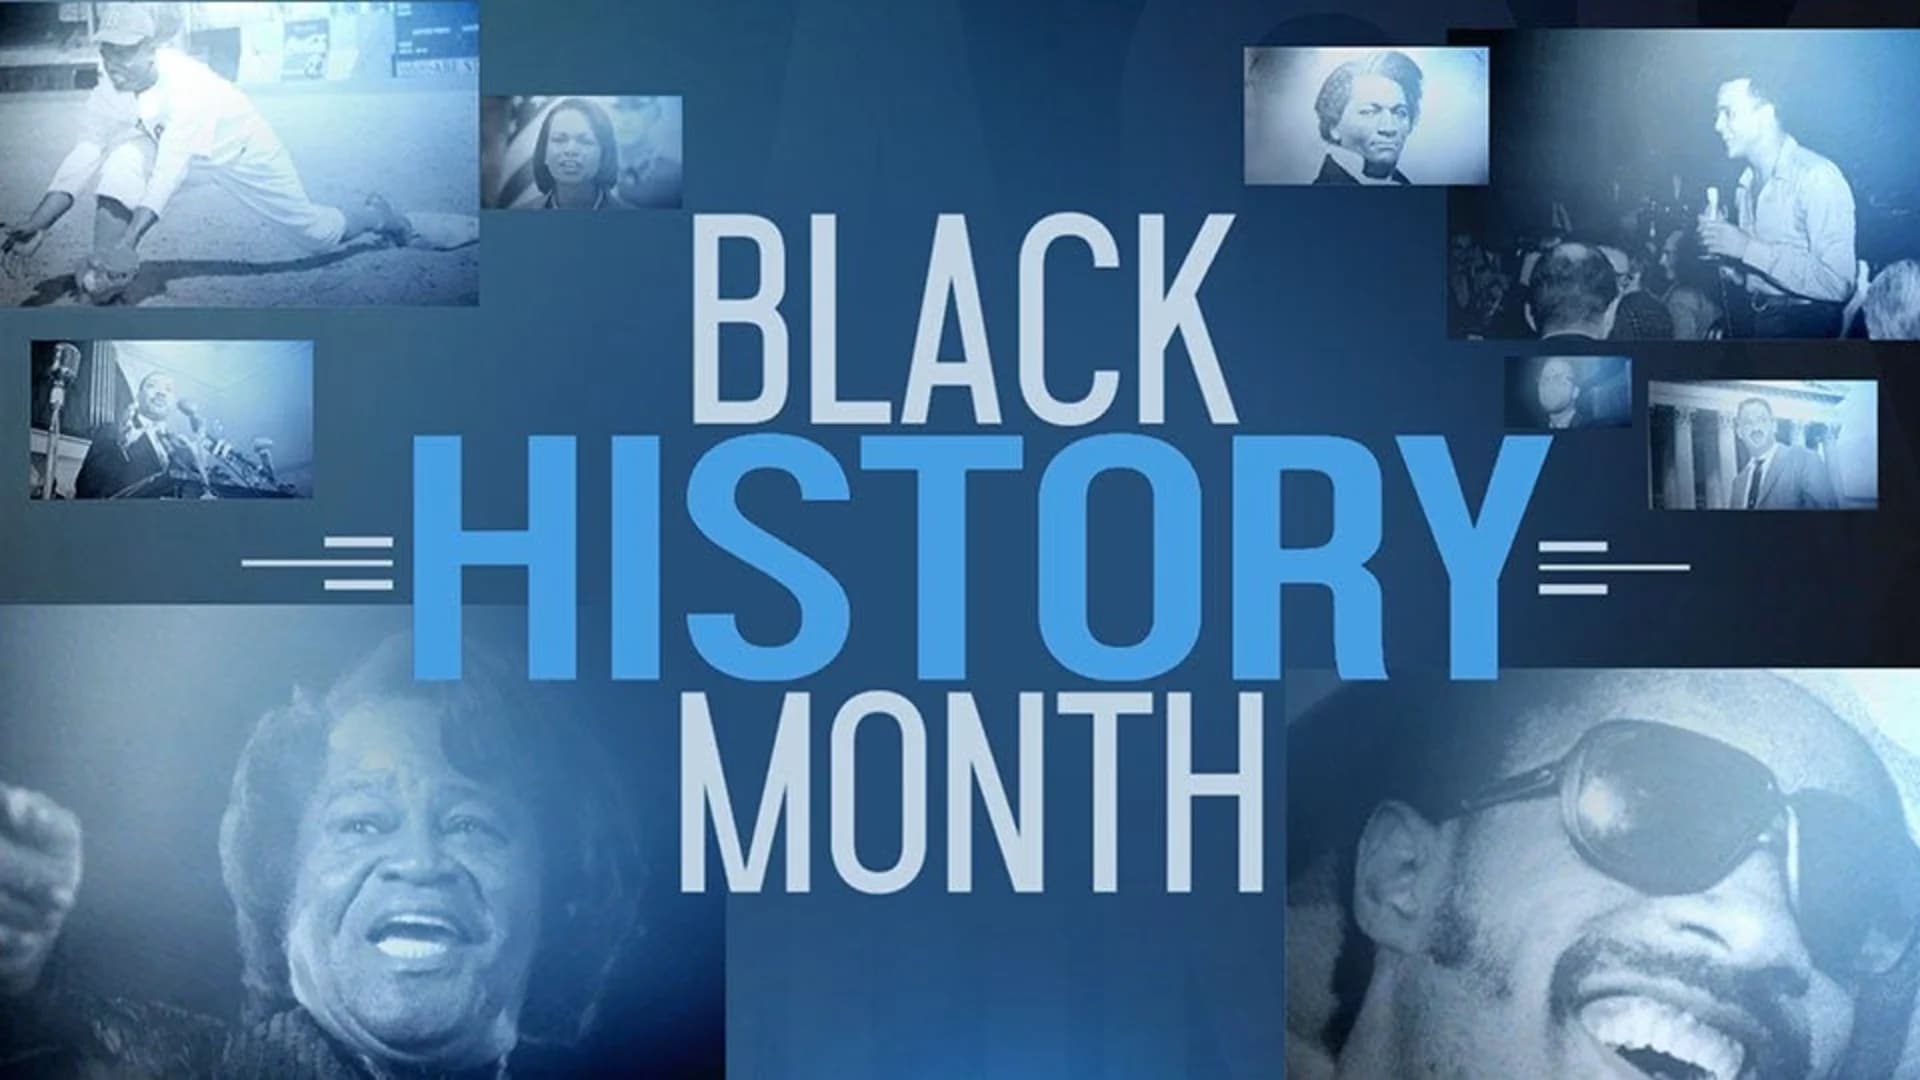 Black History Month 2019 - Series Information